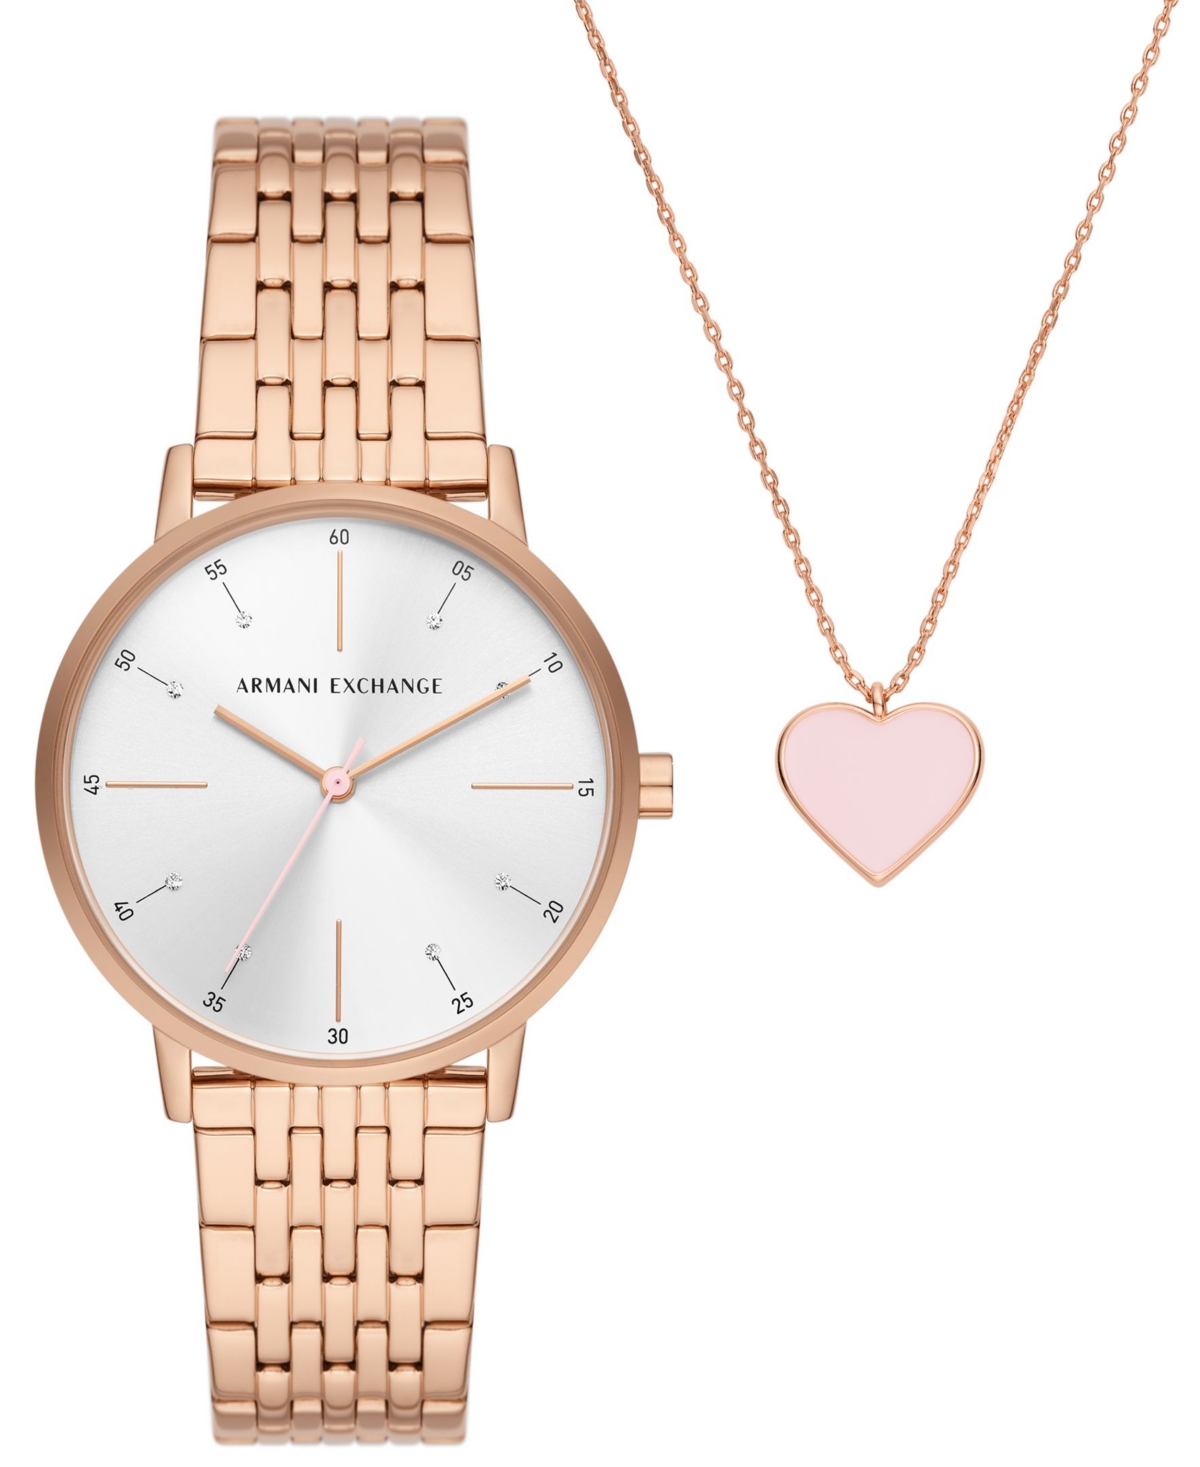 Ax Armani Exchange Women's Three-hand Rose Gold-tone Stainless Steel Bracelet Watch, 36mm And Rose Gold-tone Stainless